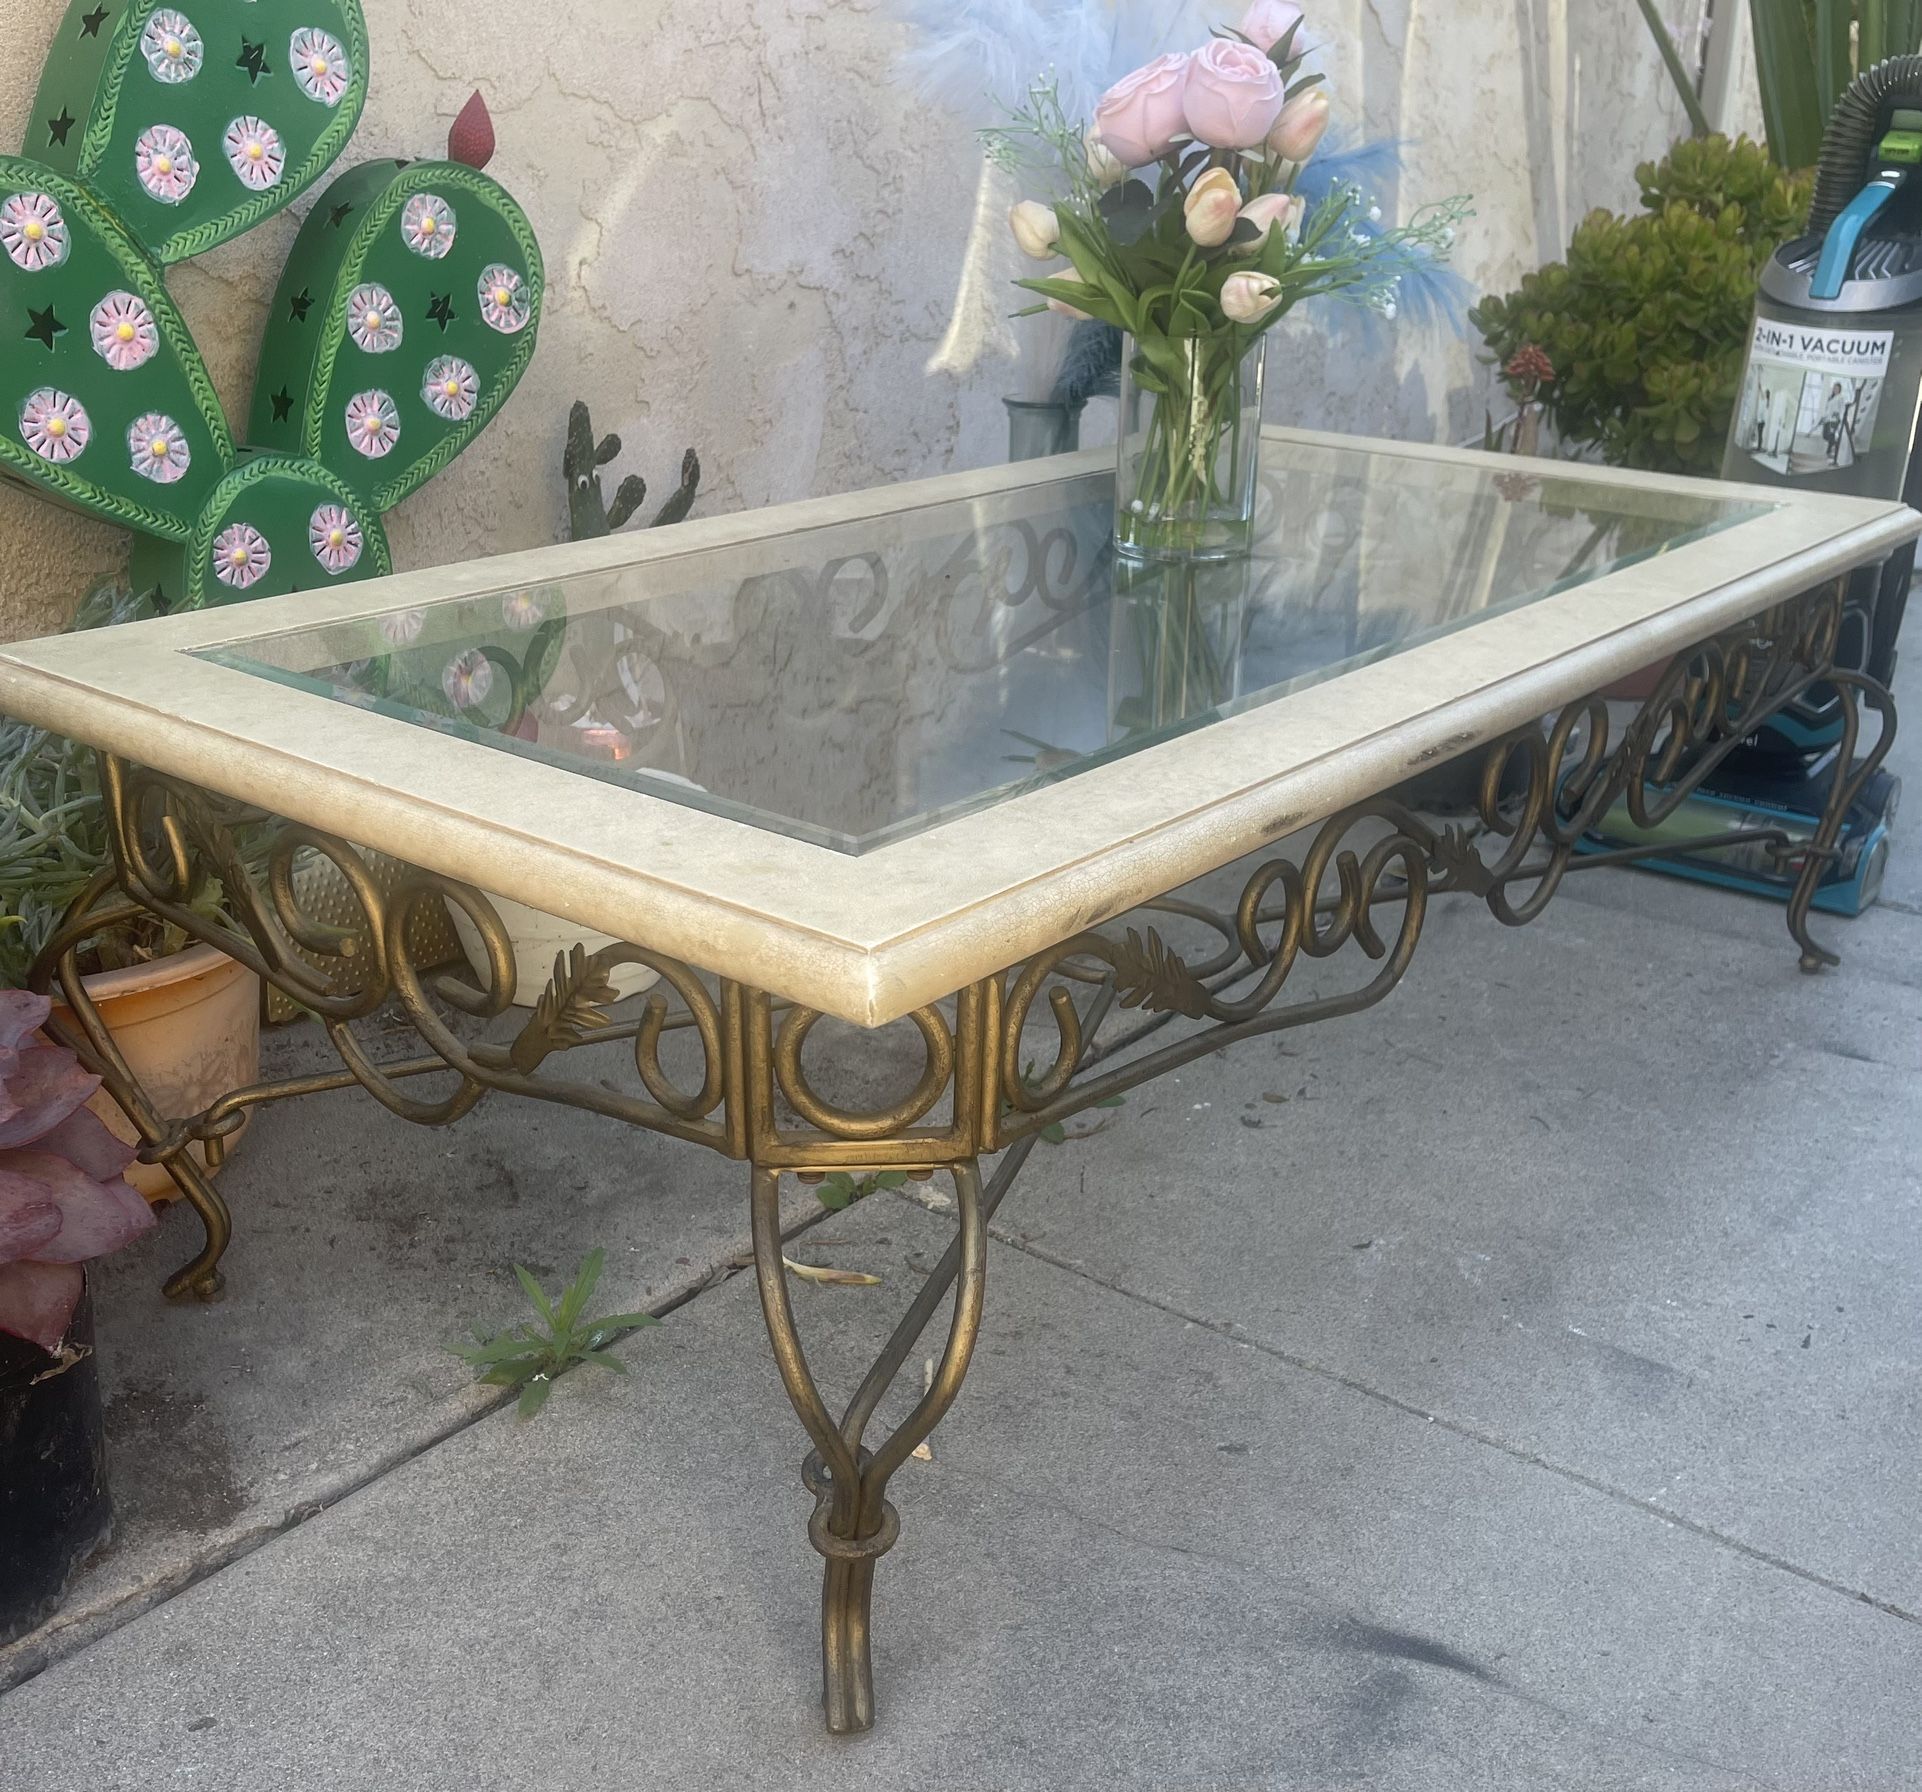 Glass Coffee Table  $ 15 Cash Only 